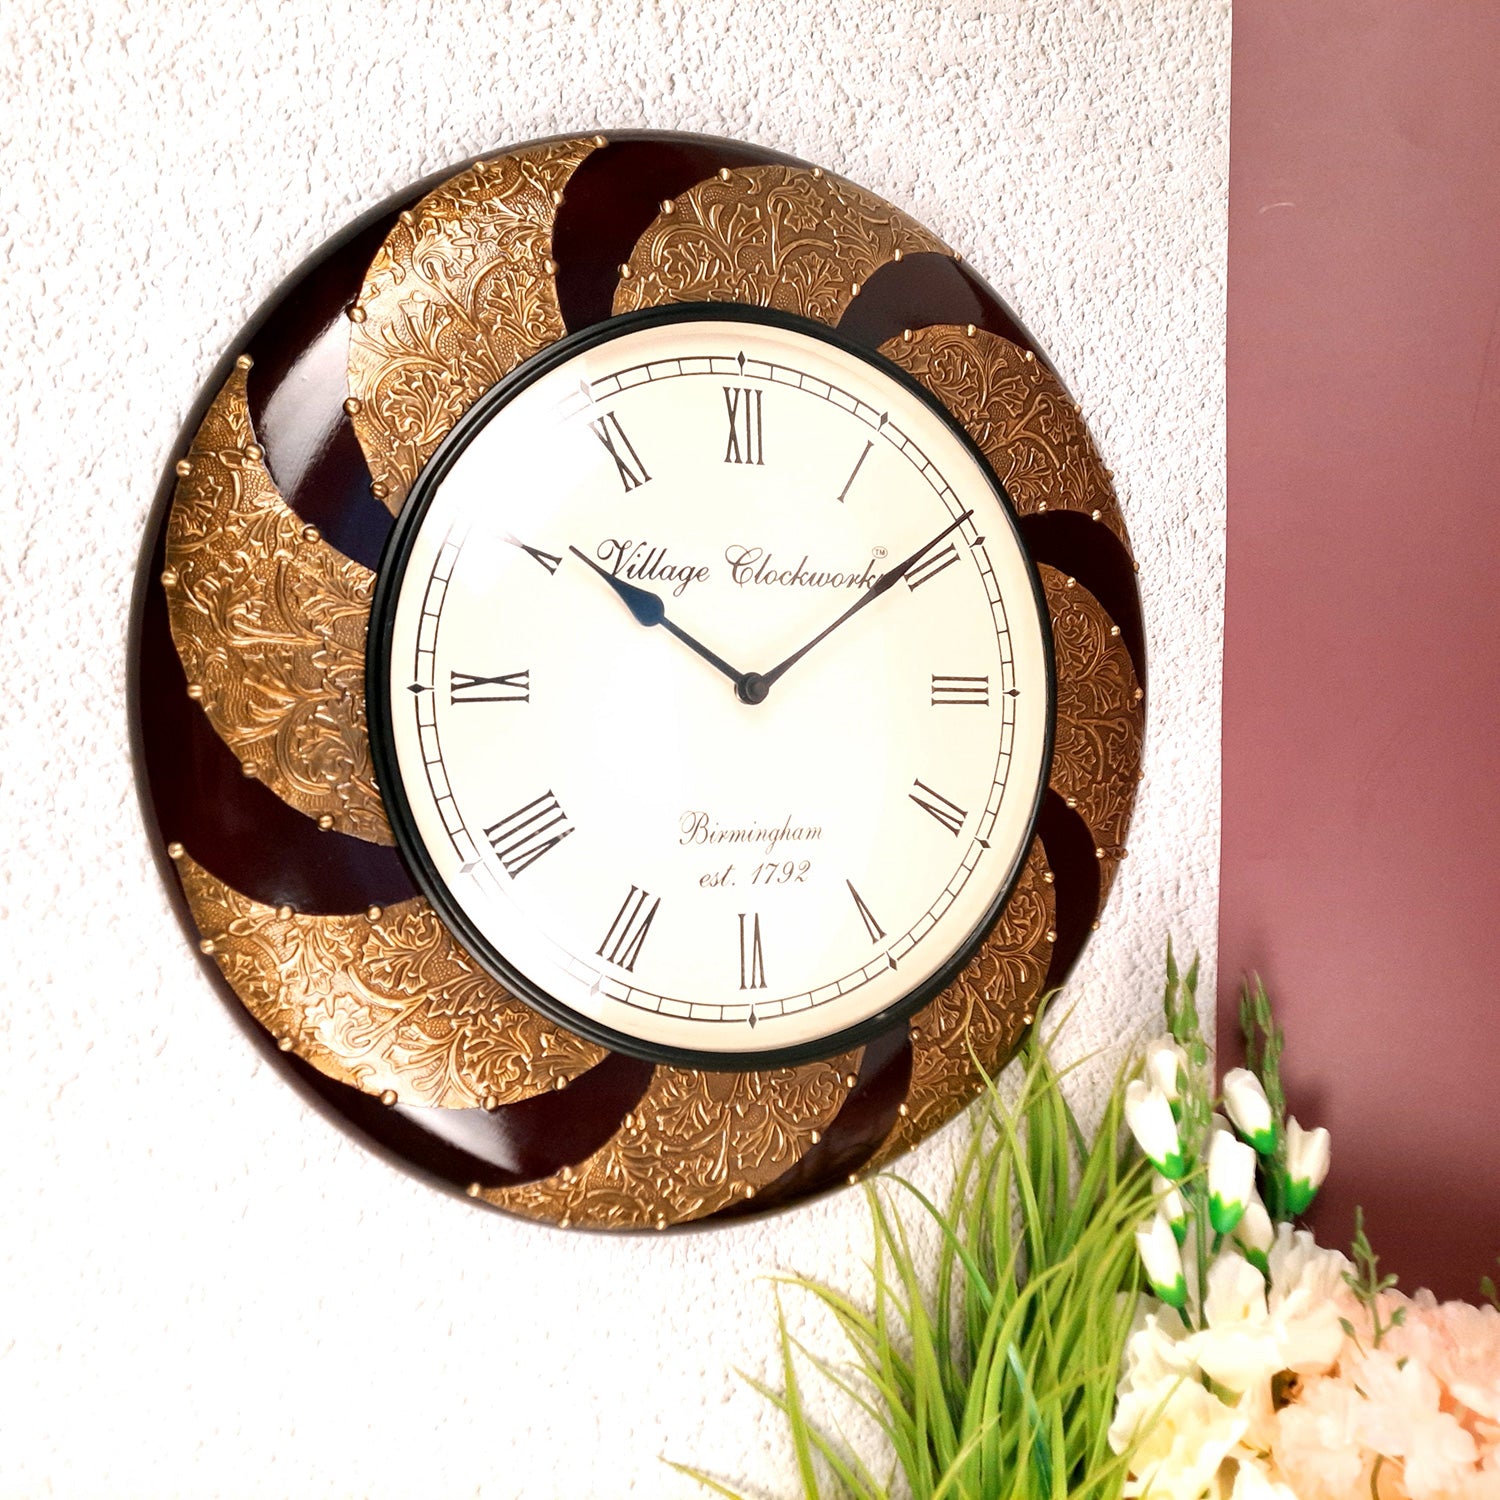 Wall Clock Wooden | Wall Mount Analogue Clock With Premium Wood Finish & Brass Work - For Home, Living Room, Bedroom, Hall Decor | Wedding & Housewarming Gift - 18 Inch - Apkamart